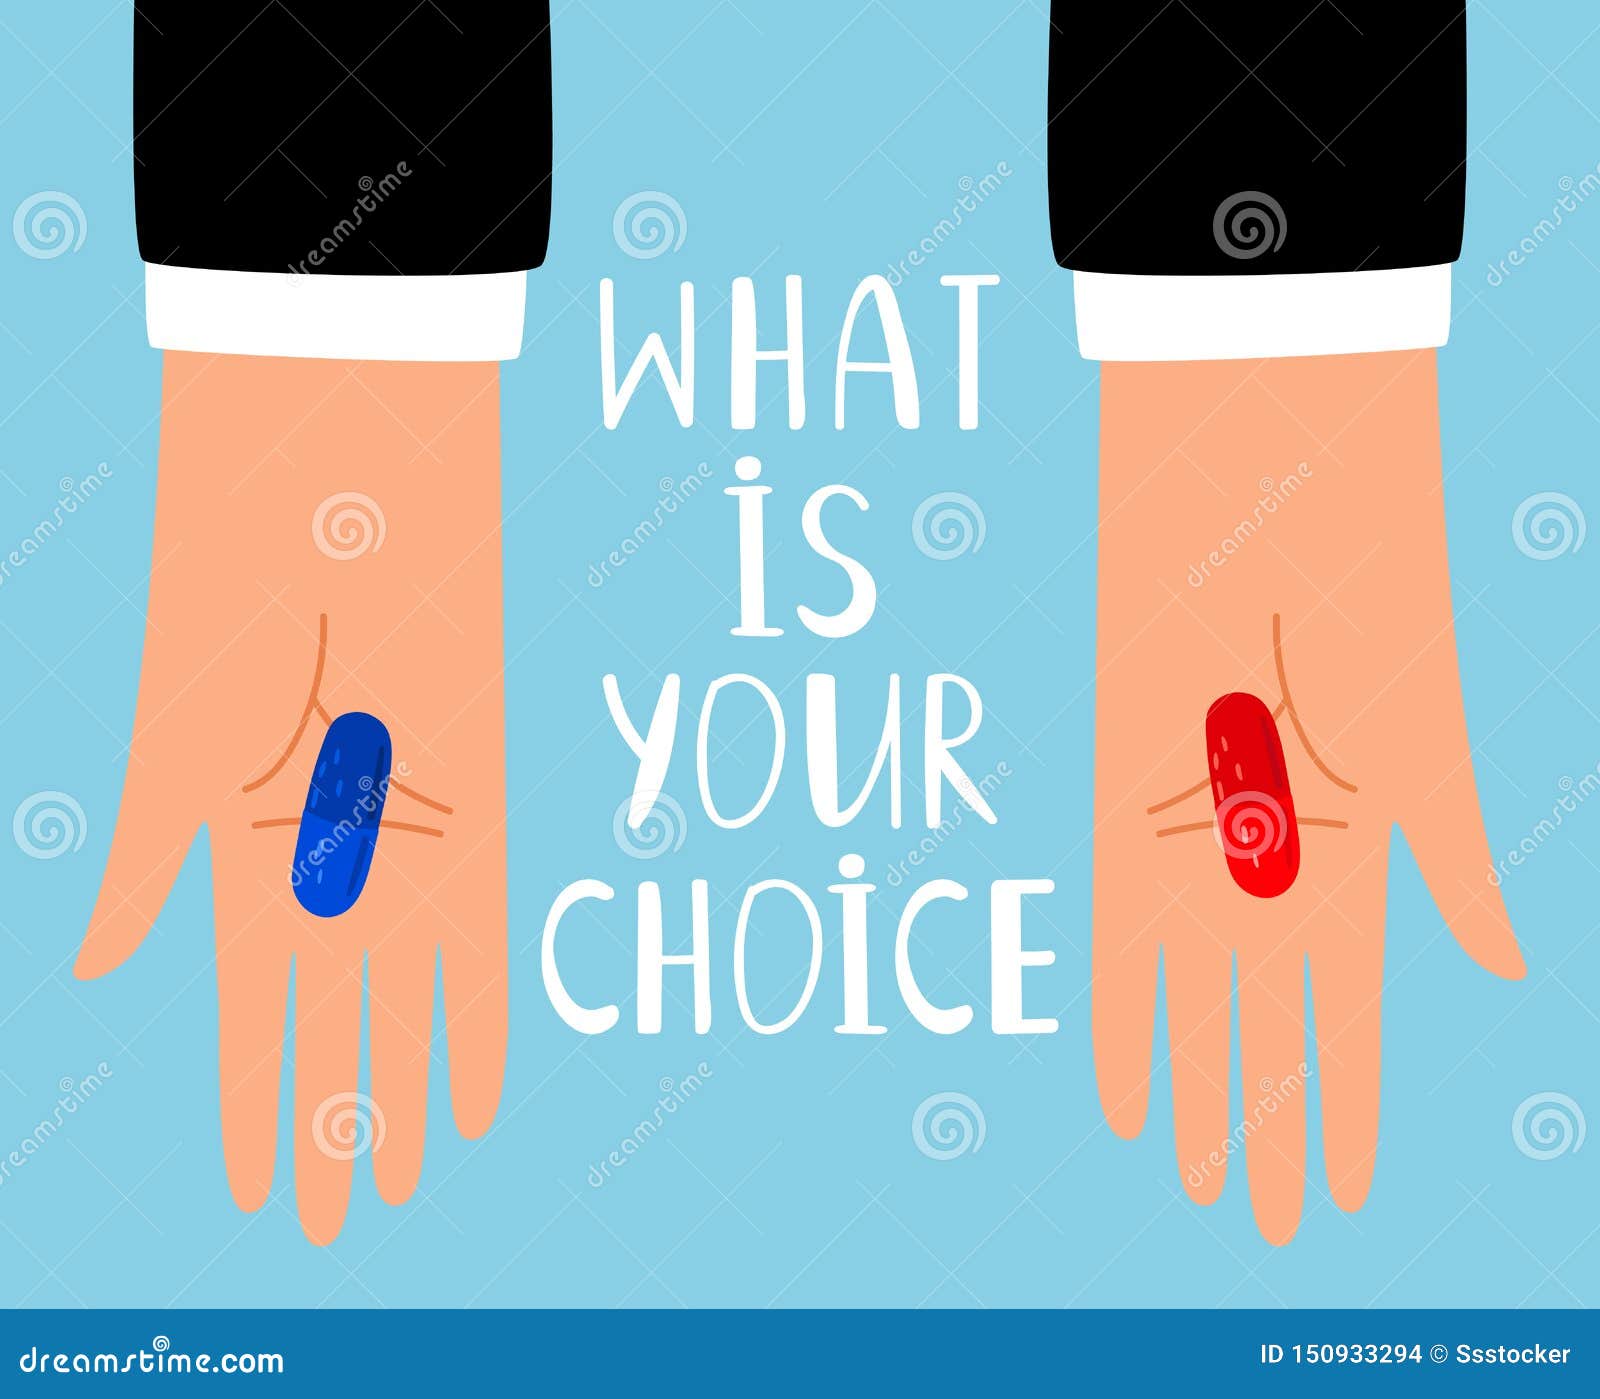 Red And Blue Pills Choice Stock Vector Illustration Of Healthy